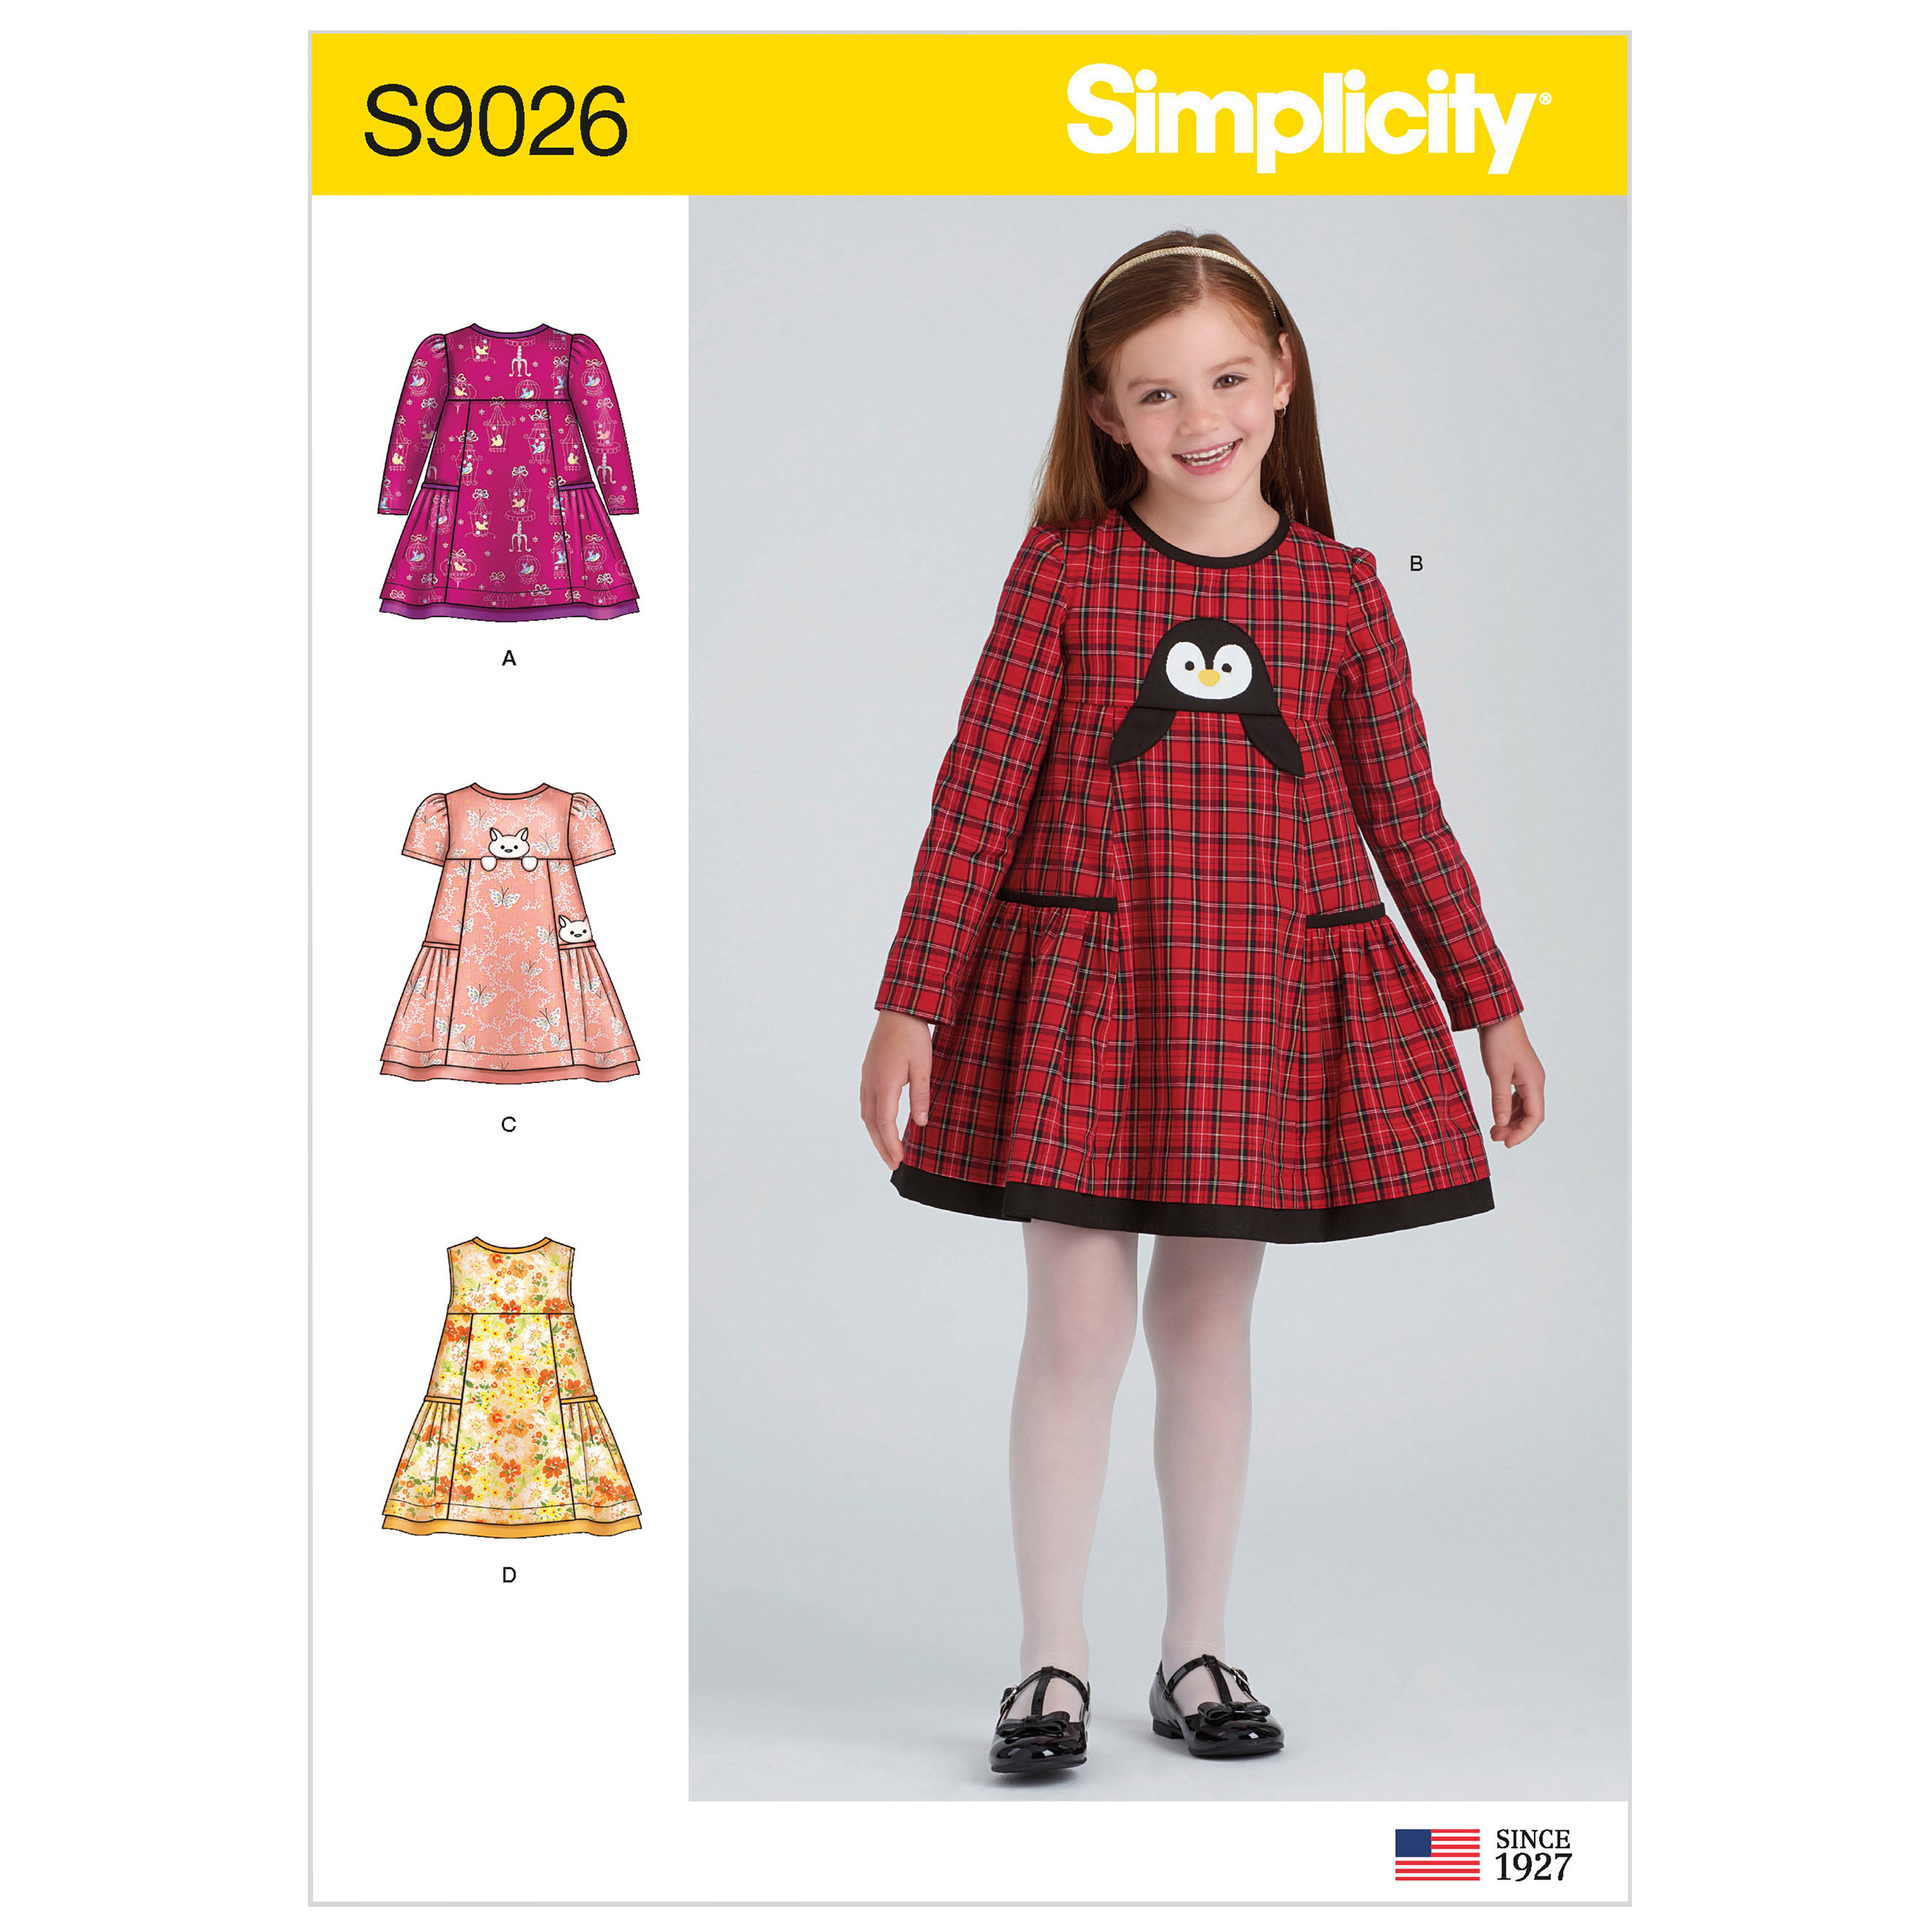 SEW KIDS CLOTHES FOR SCHOOL, KIDS SEWING PATTERNS-PDF AND SIMPLICITY 9200 SEWING  PATTERN FOR KIDS. 